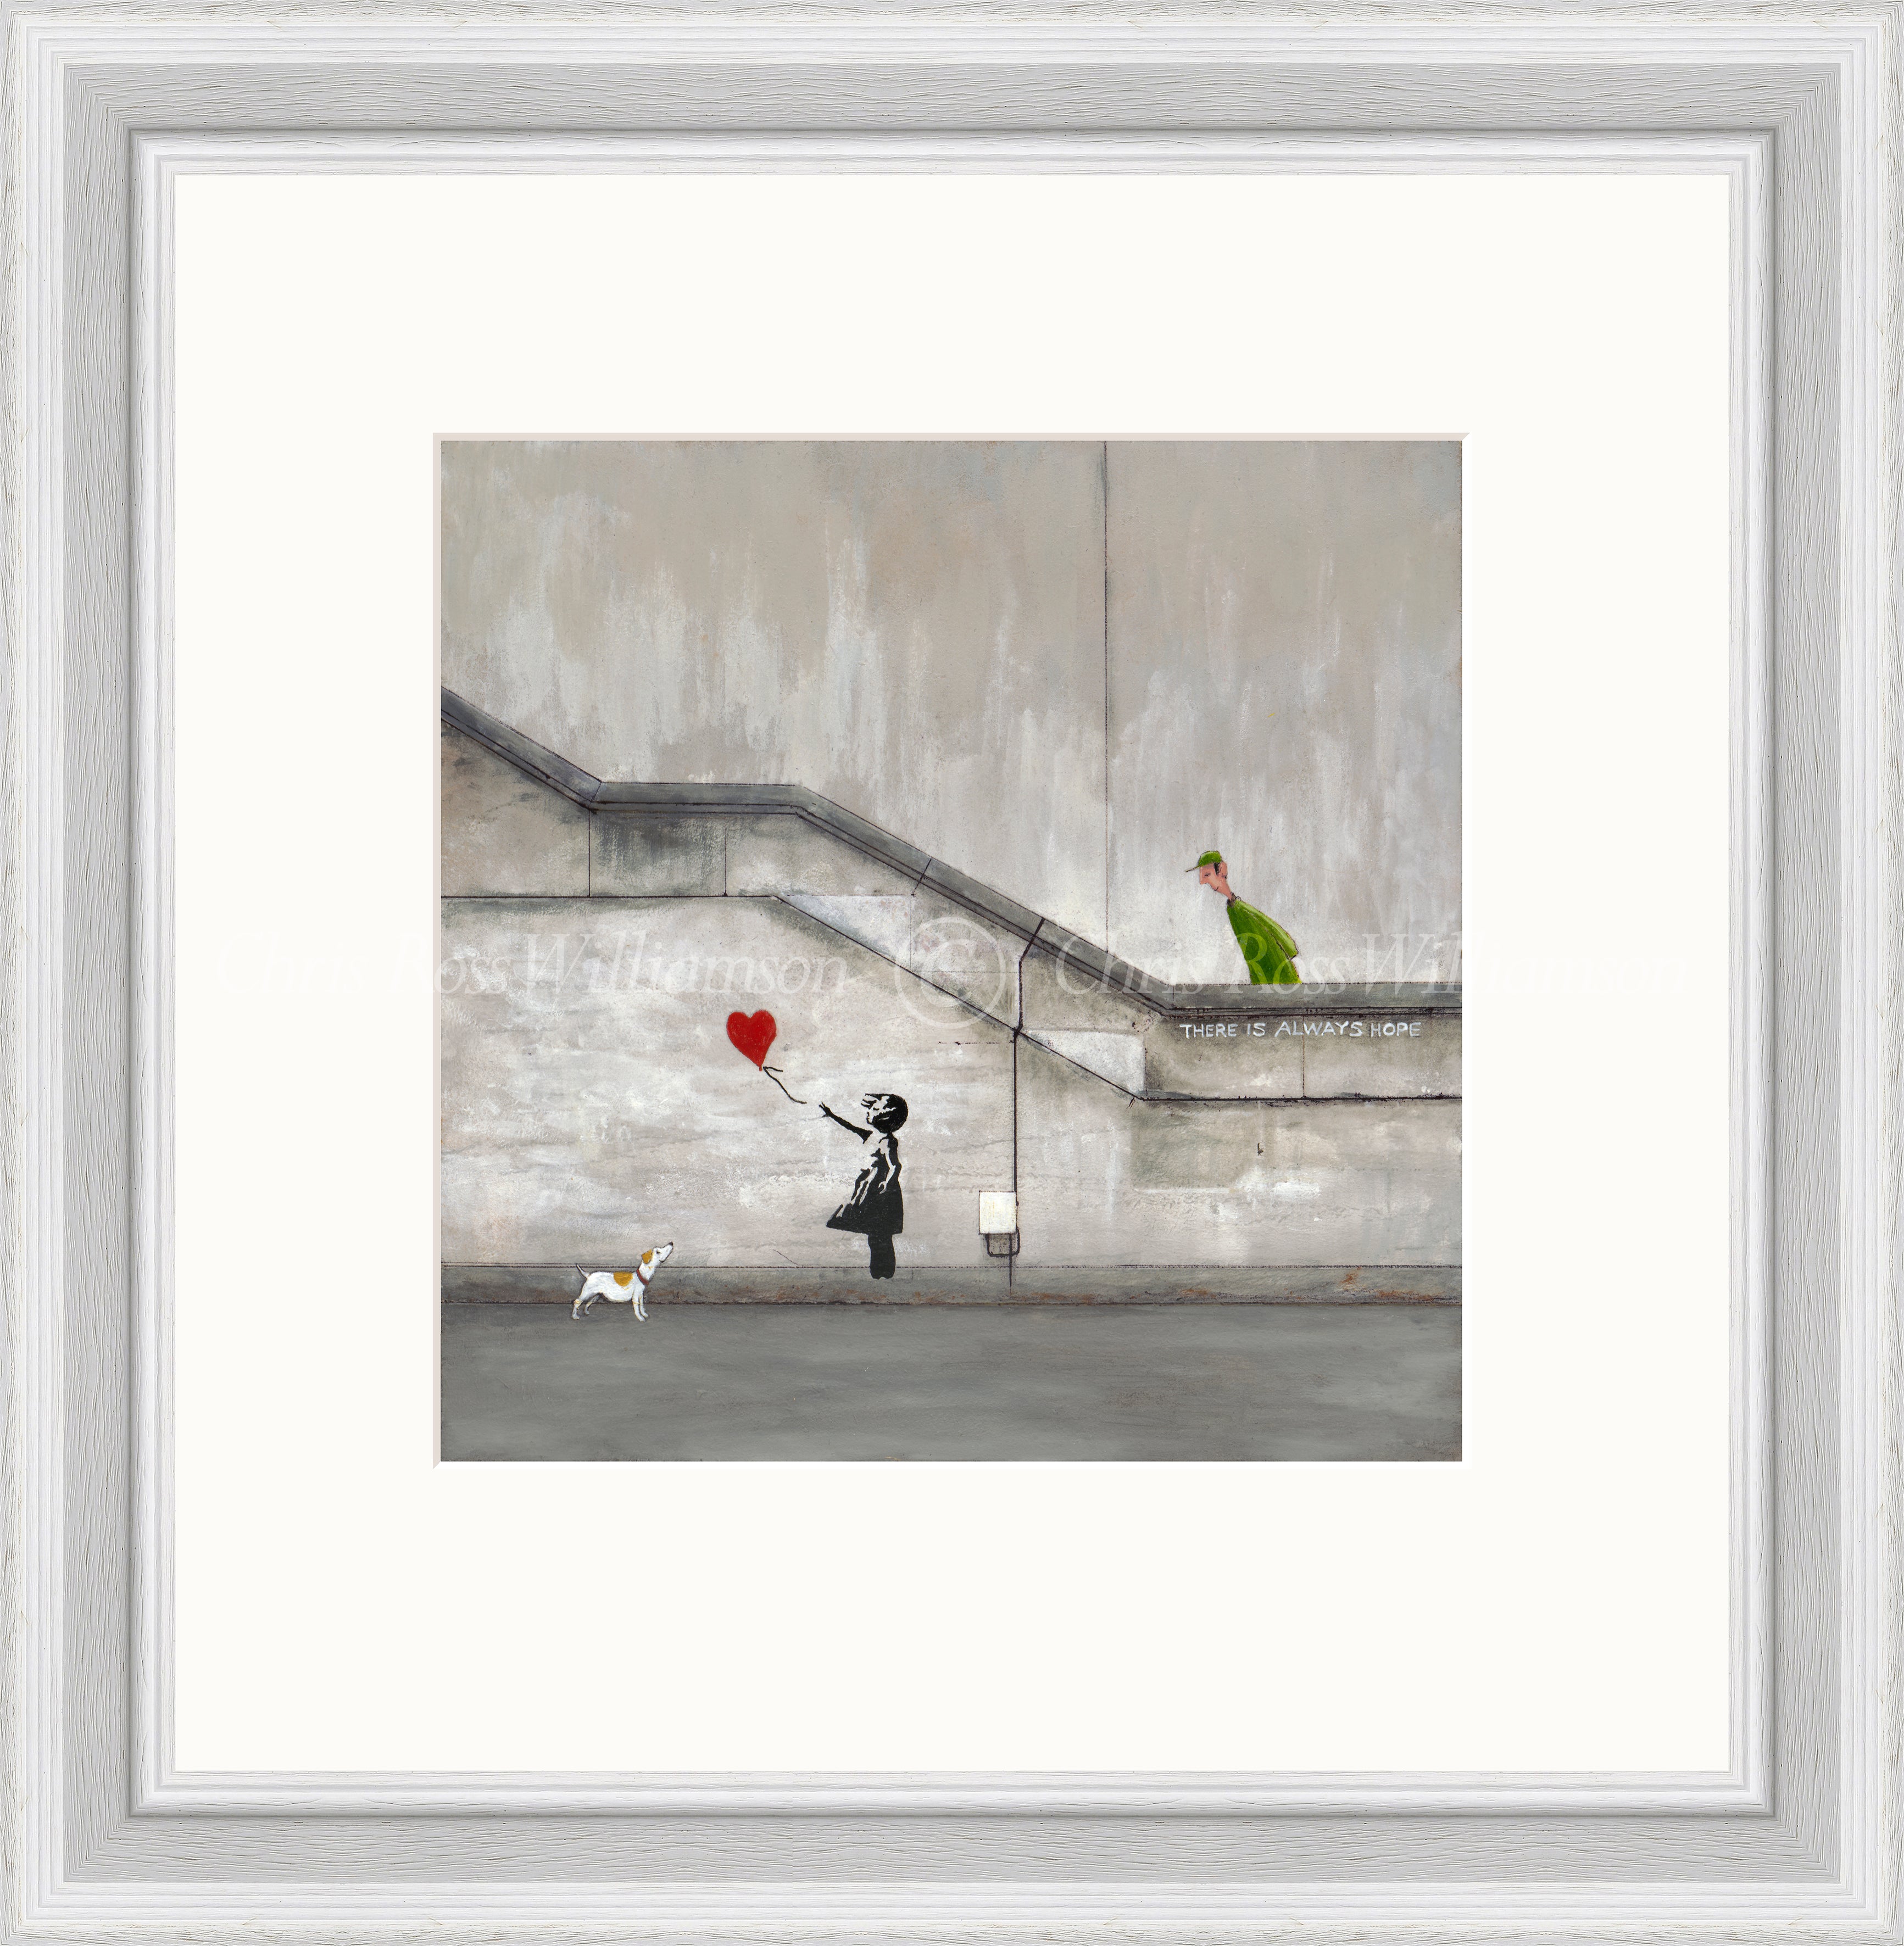 Chris Ross Williamson The Banksy signed limited edition art print